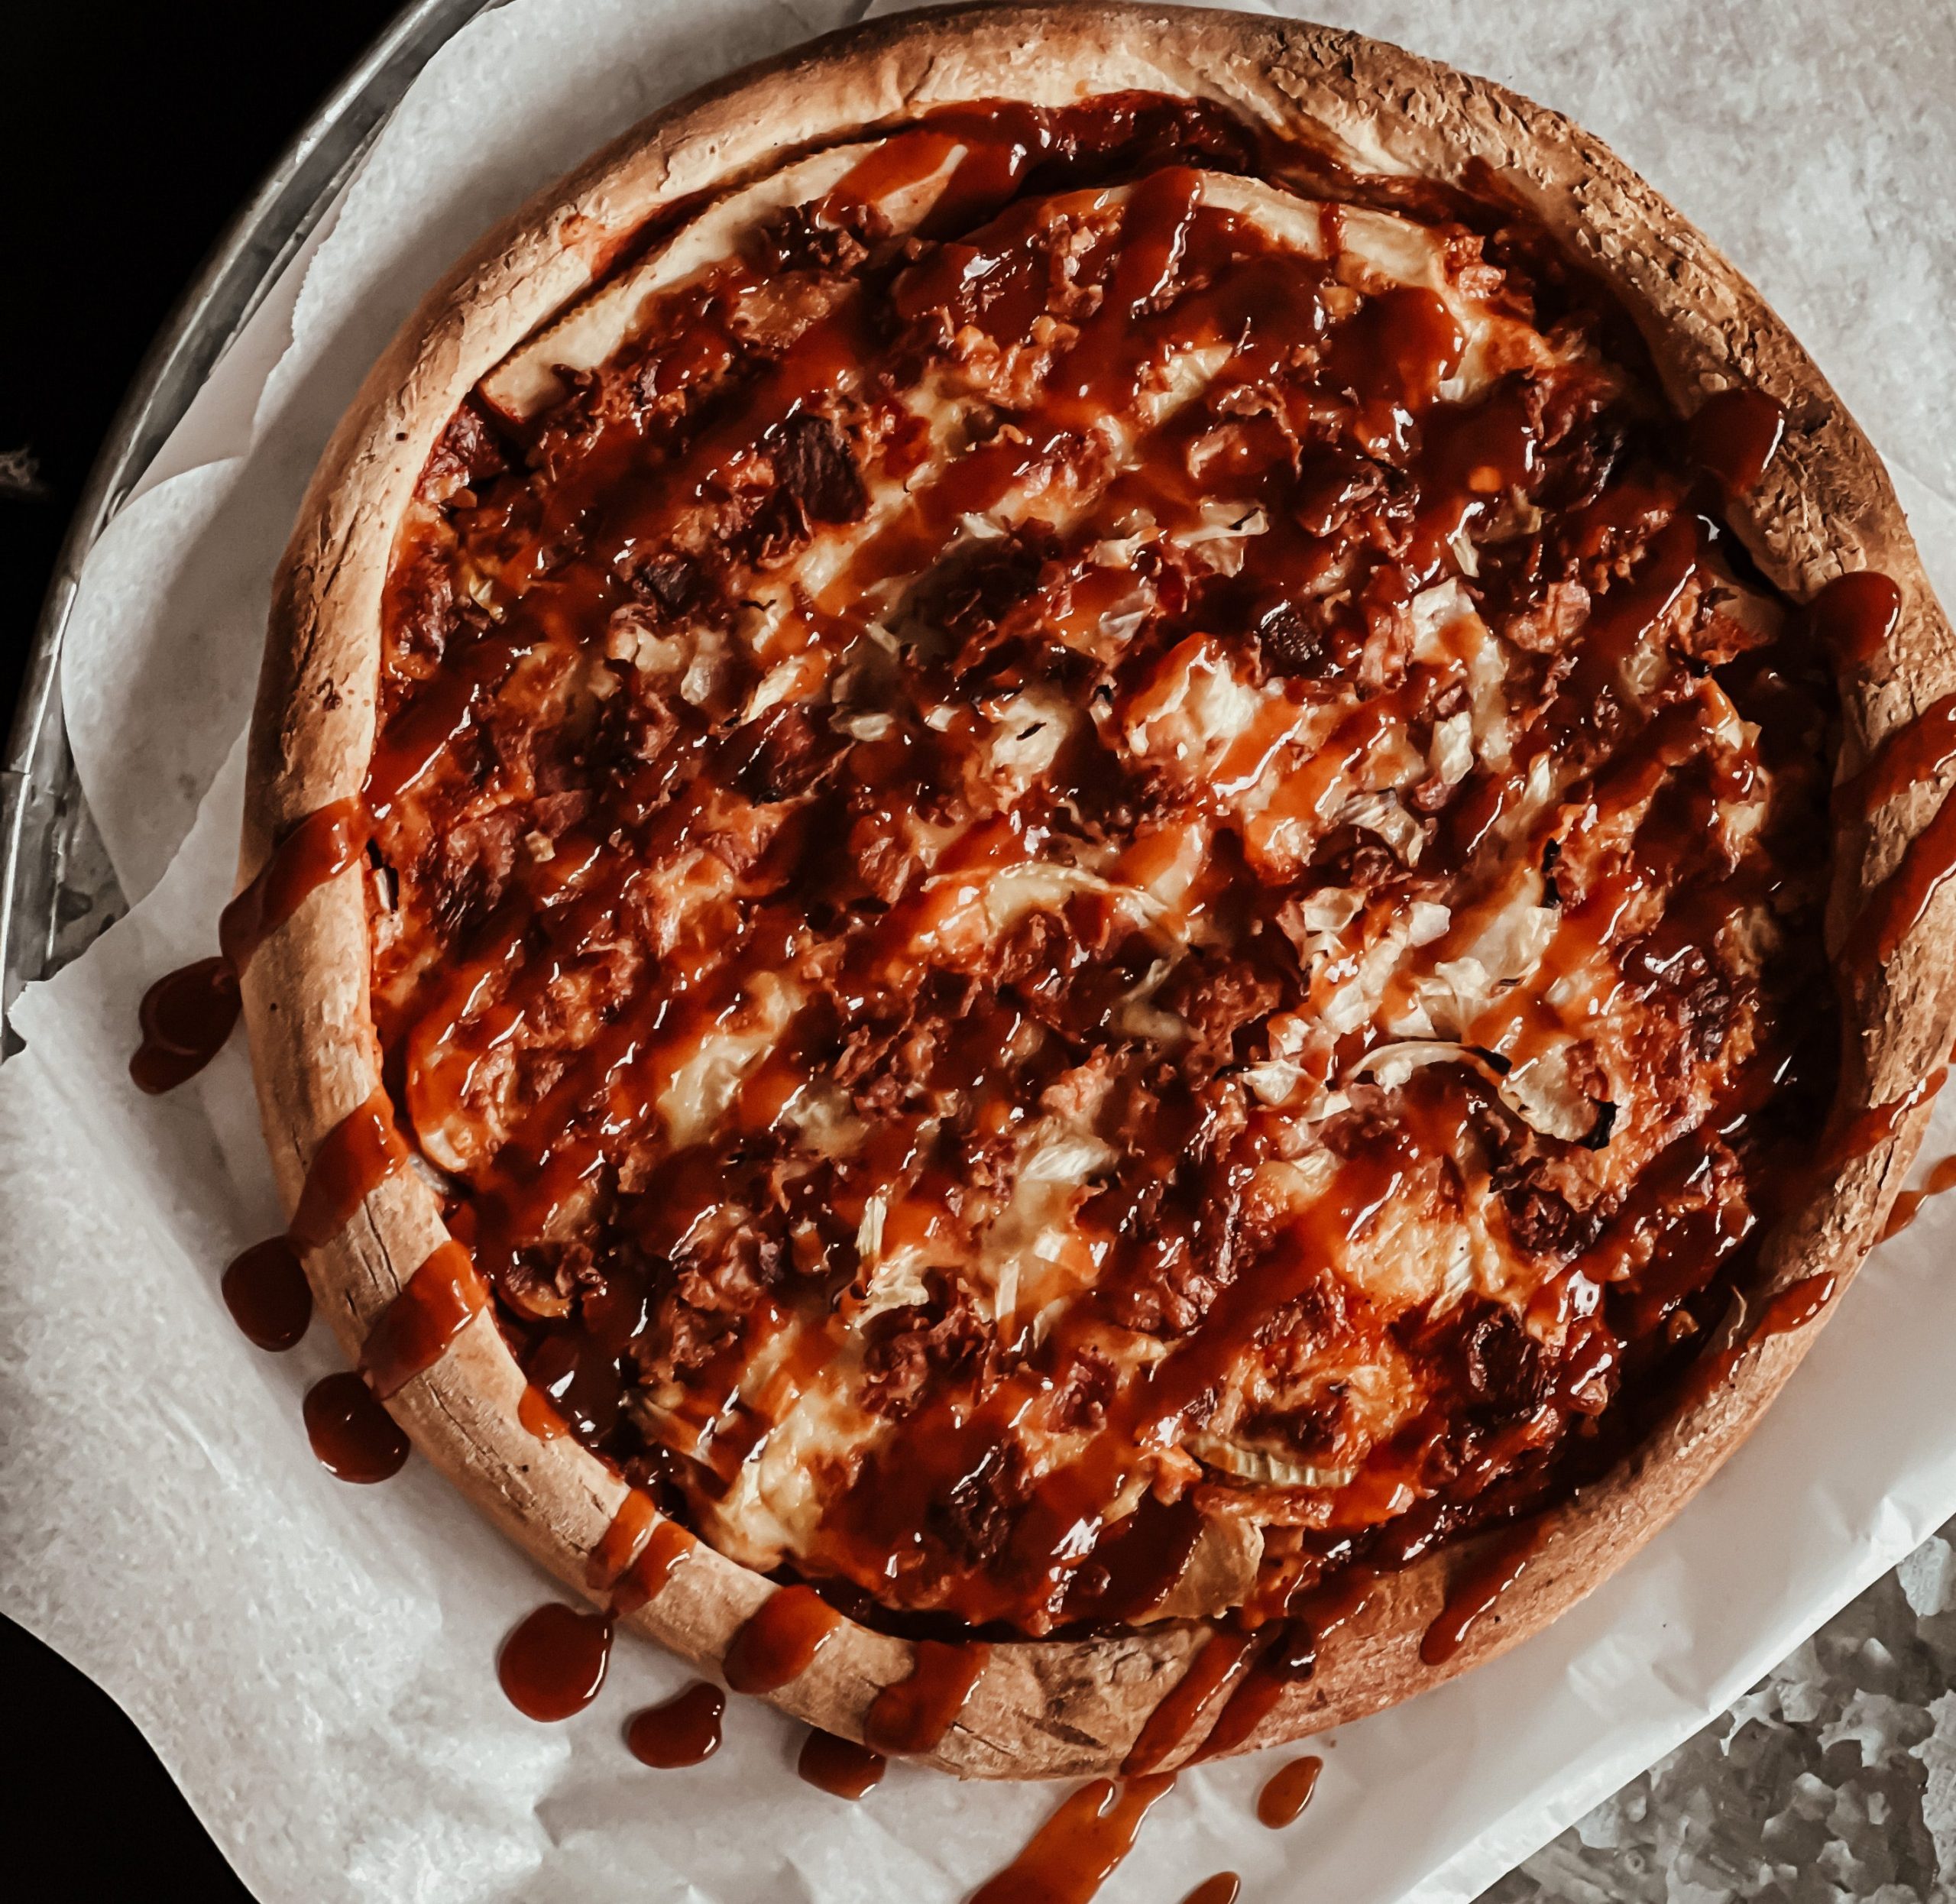 Pizza-poulet-bbq-4-scaled-aspect-ratio-264-257